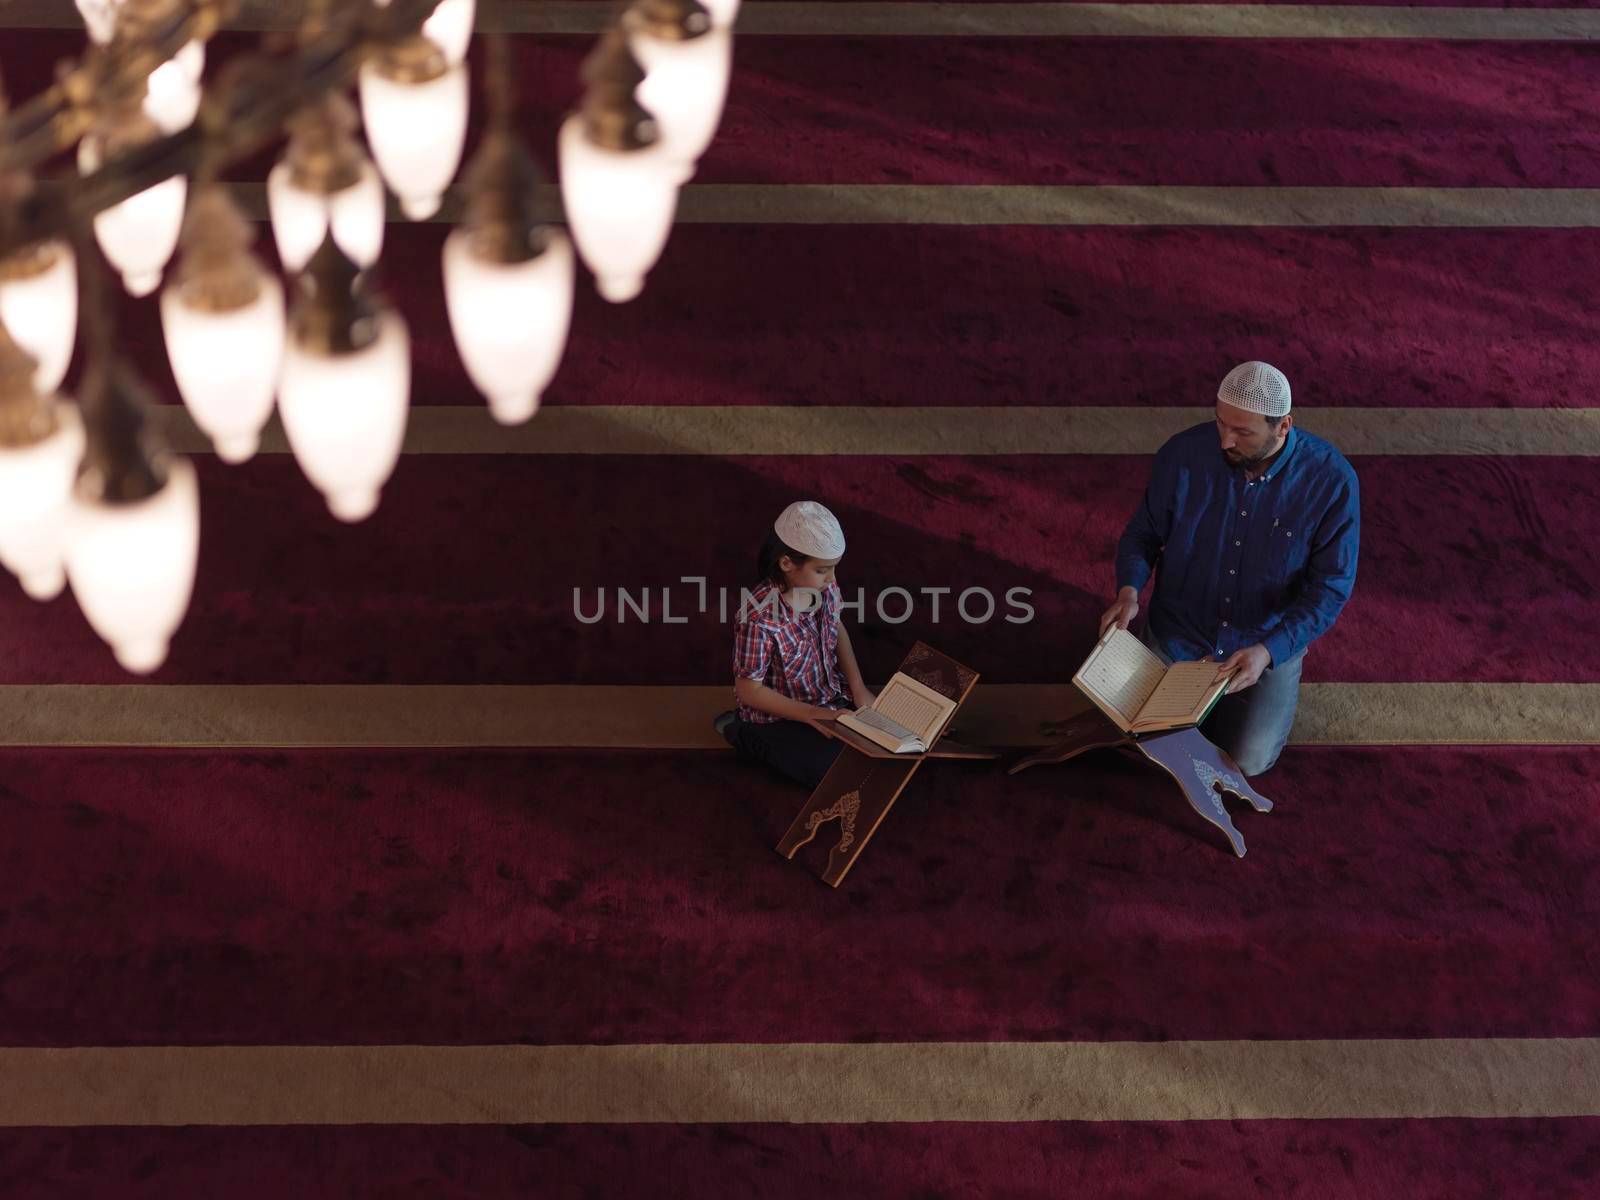 muslim prayer father and son in mosque praying and reading holly book quran together islamic education concept